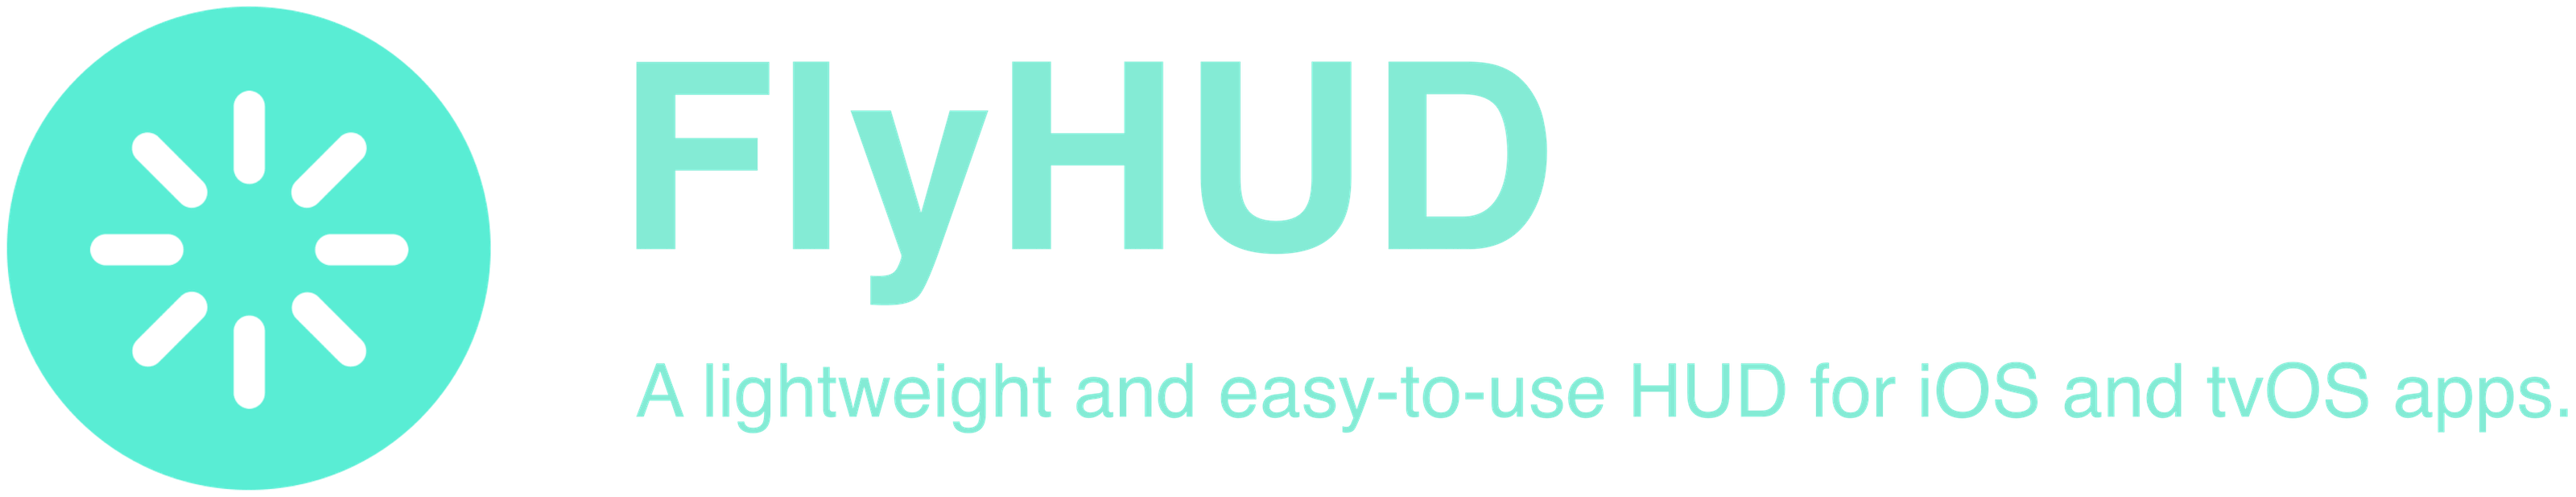 FlyHUD: Easy-to-use HUD in Swift